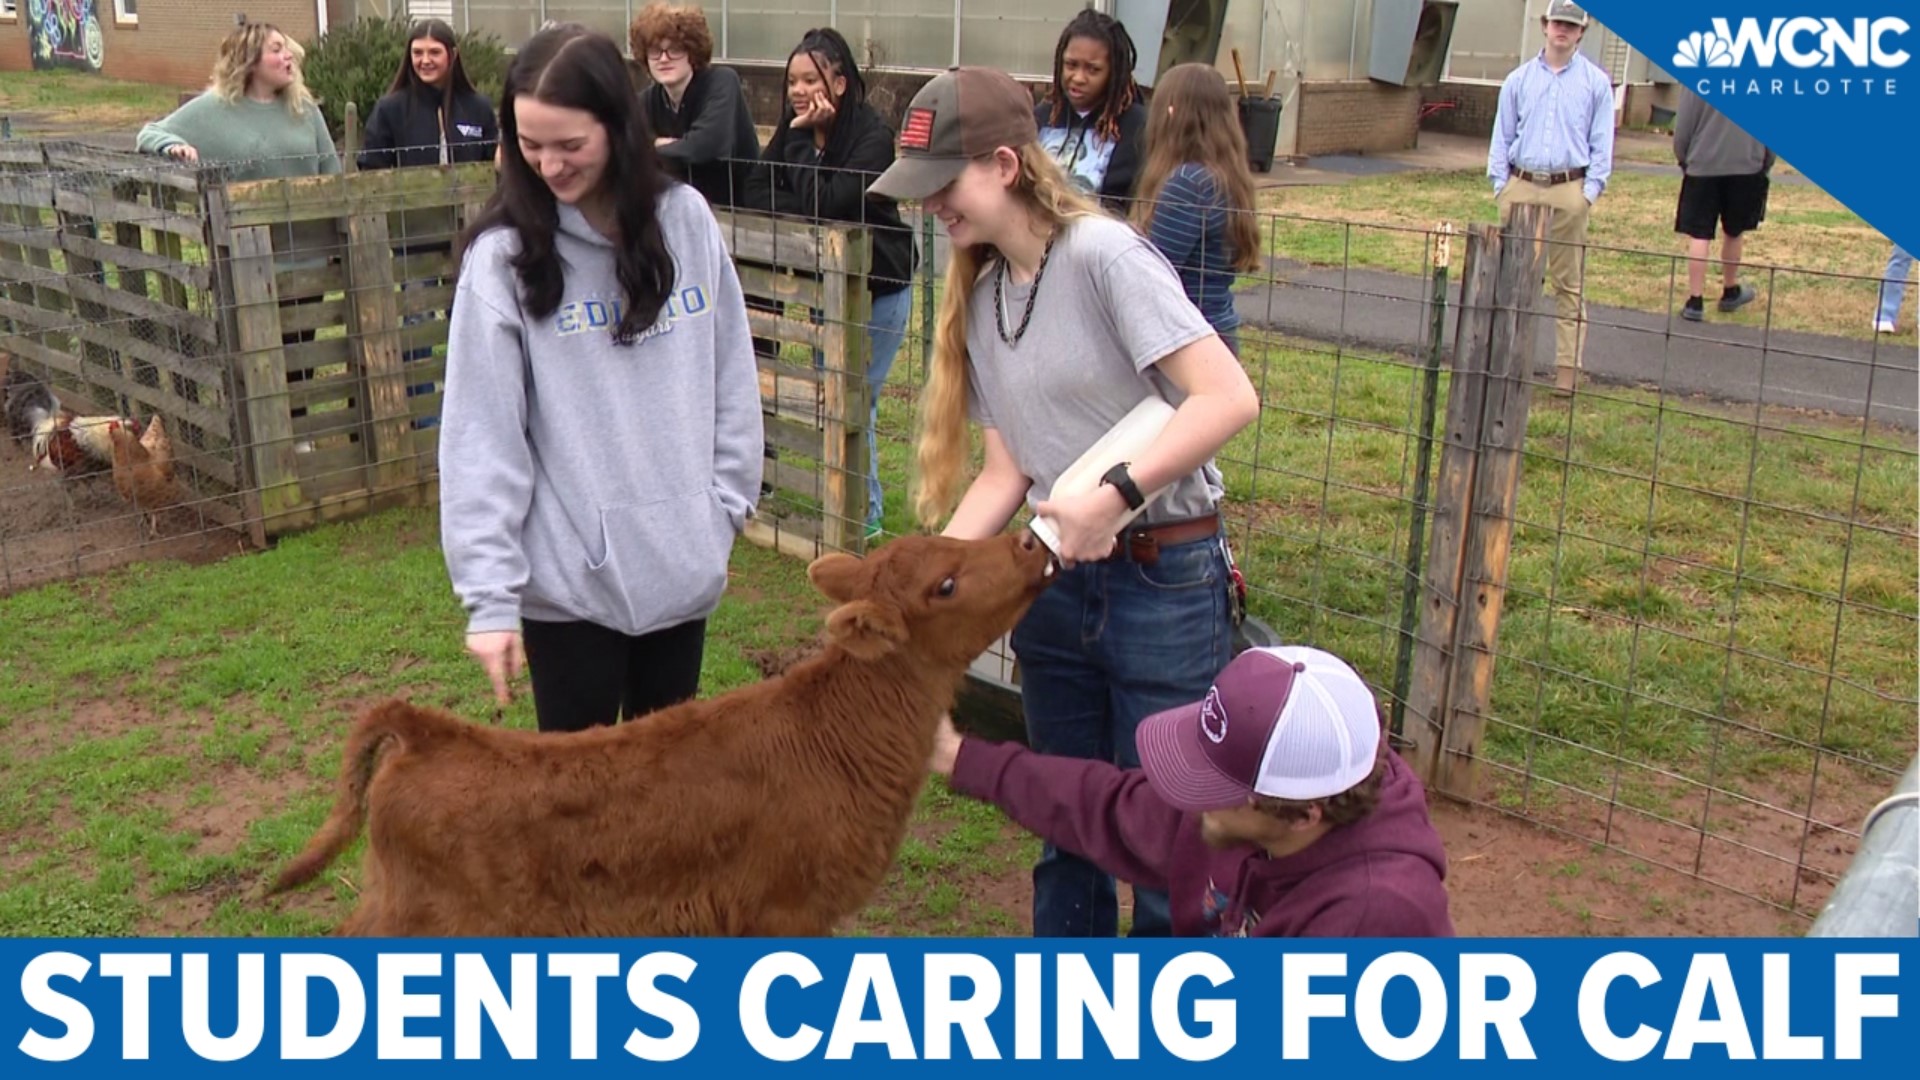 The FFA program in Rock Hill offers students a unique opportunity to take care of a special calf.